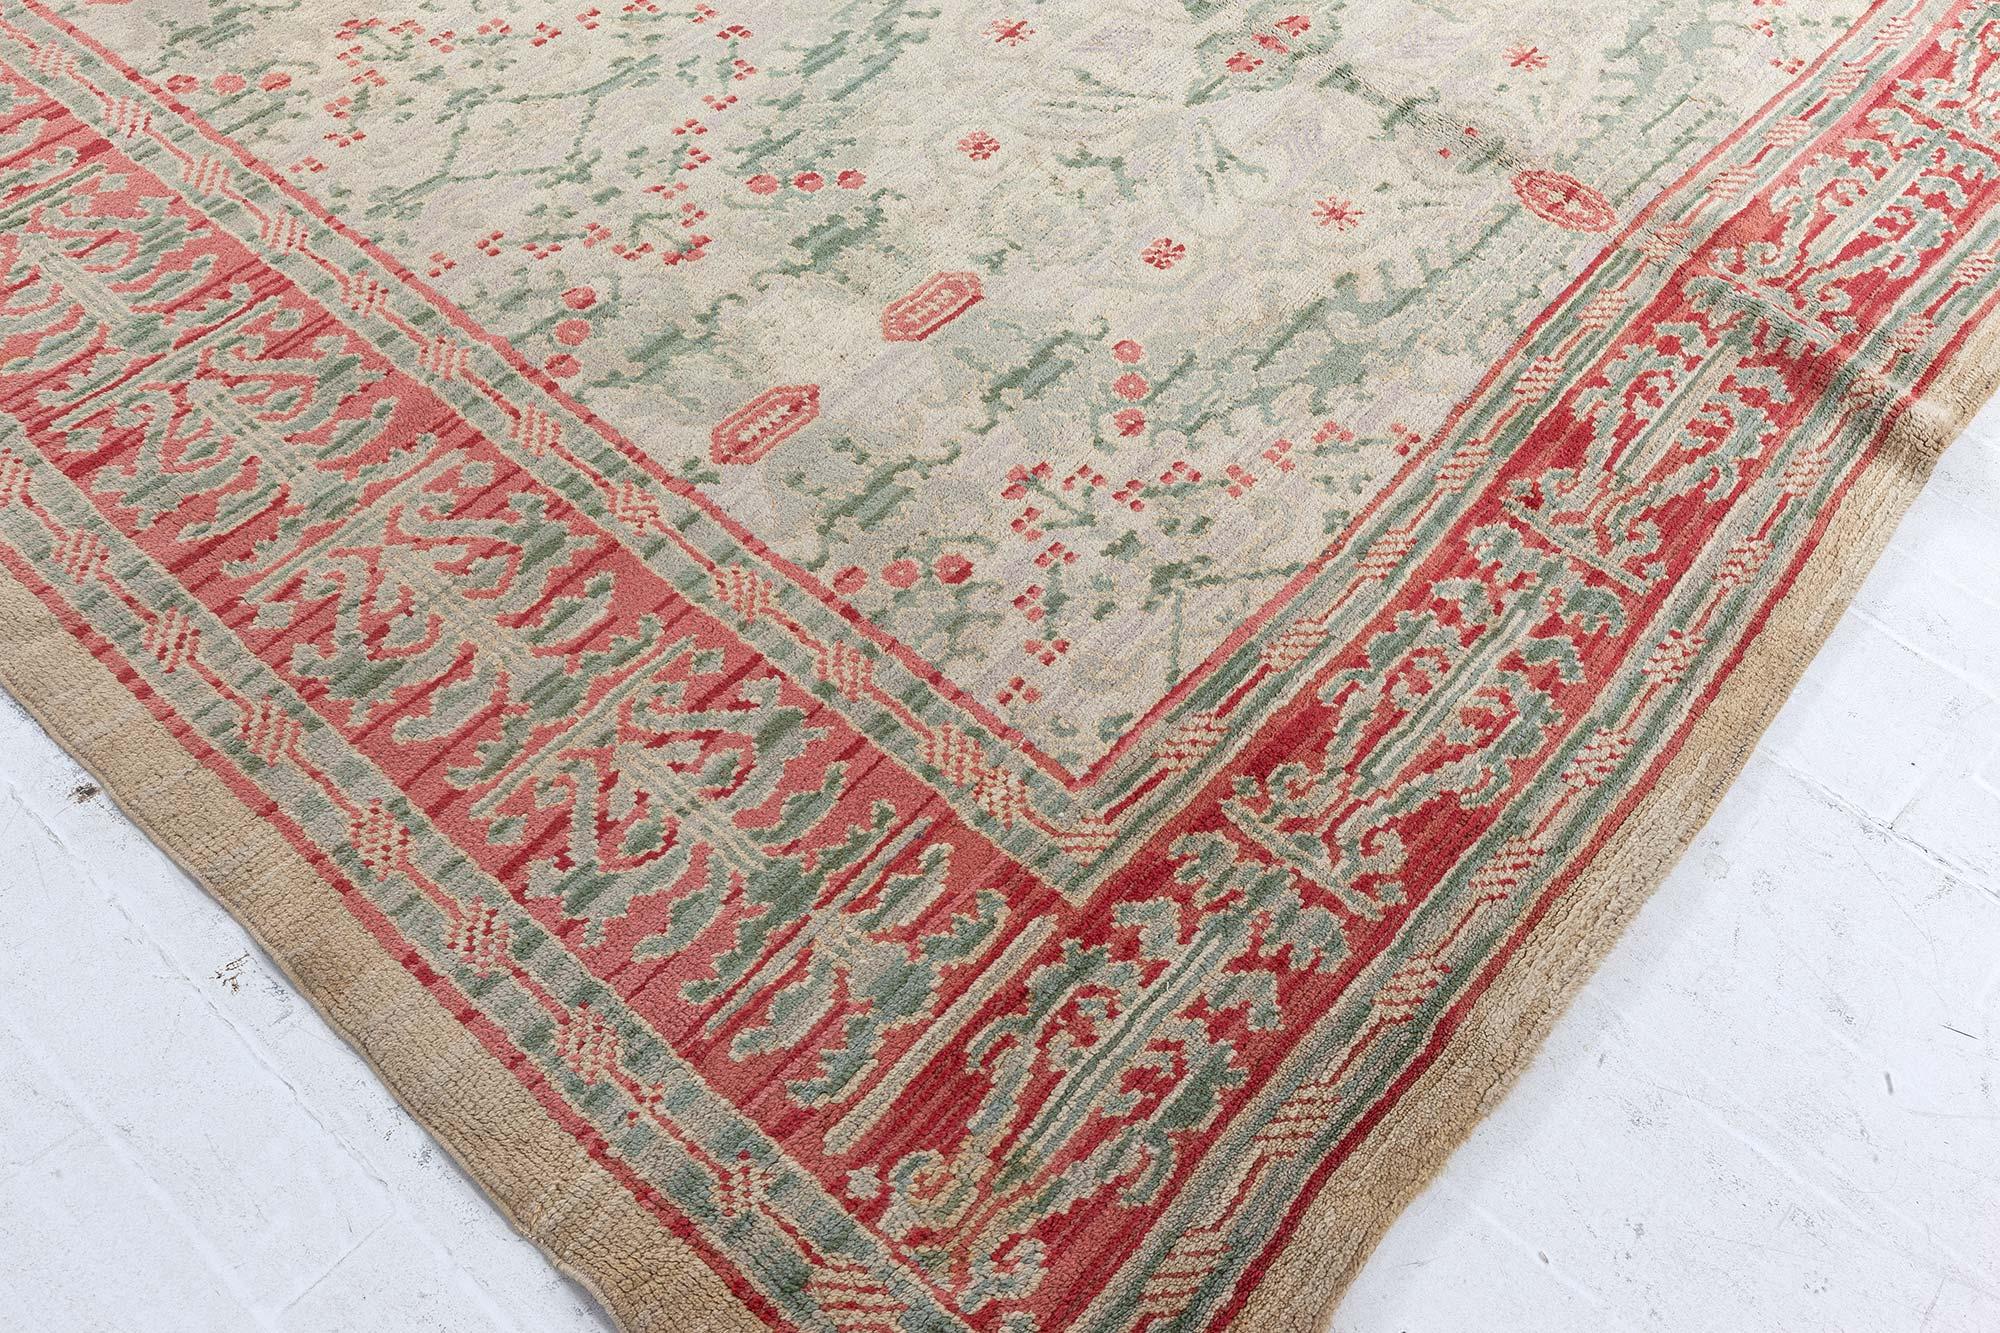 20th Century Mid-20th century Spanish Floral Handmade Wool Rug For Sale